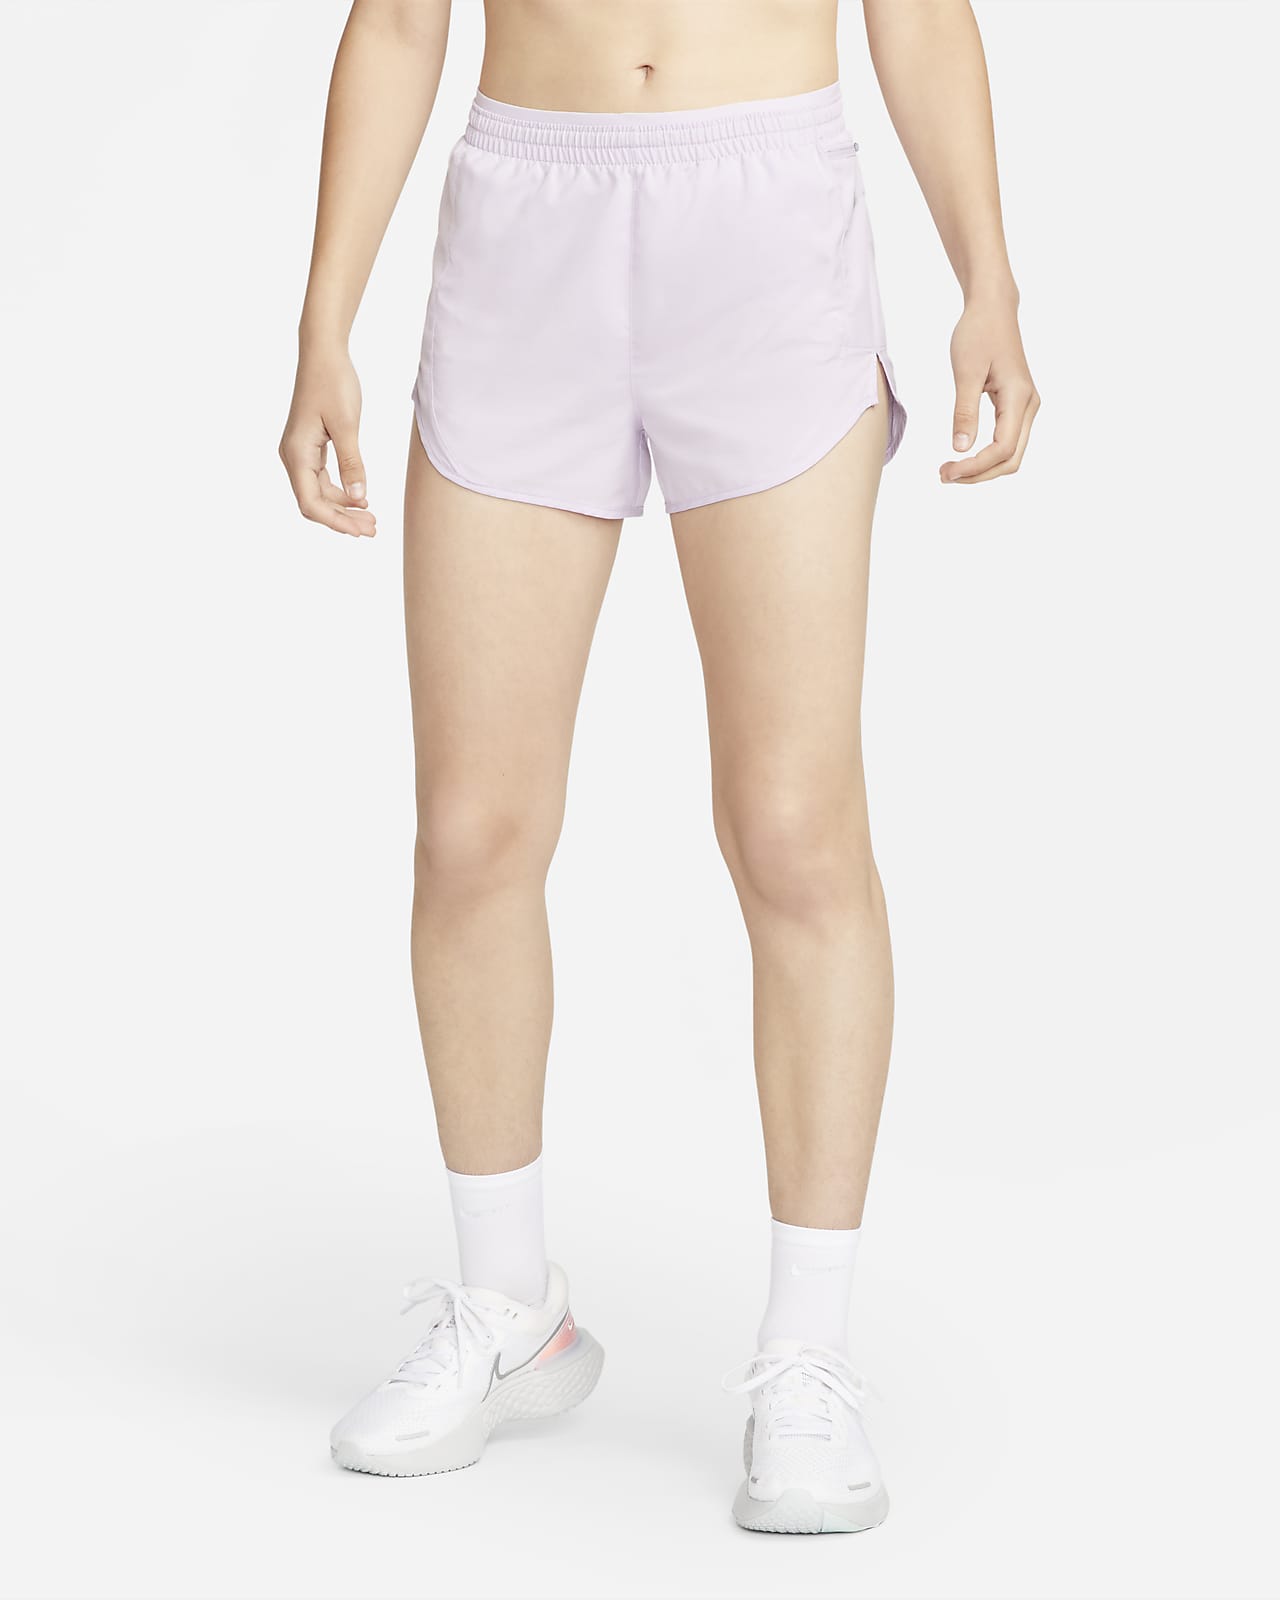 Nike Tempo Luxe Women's 8cm (approx.) Running Shorts